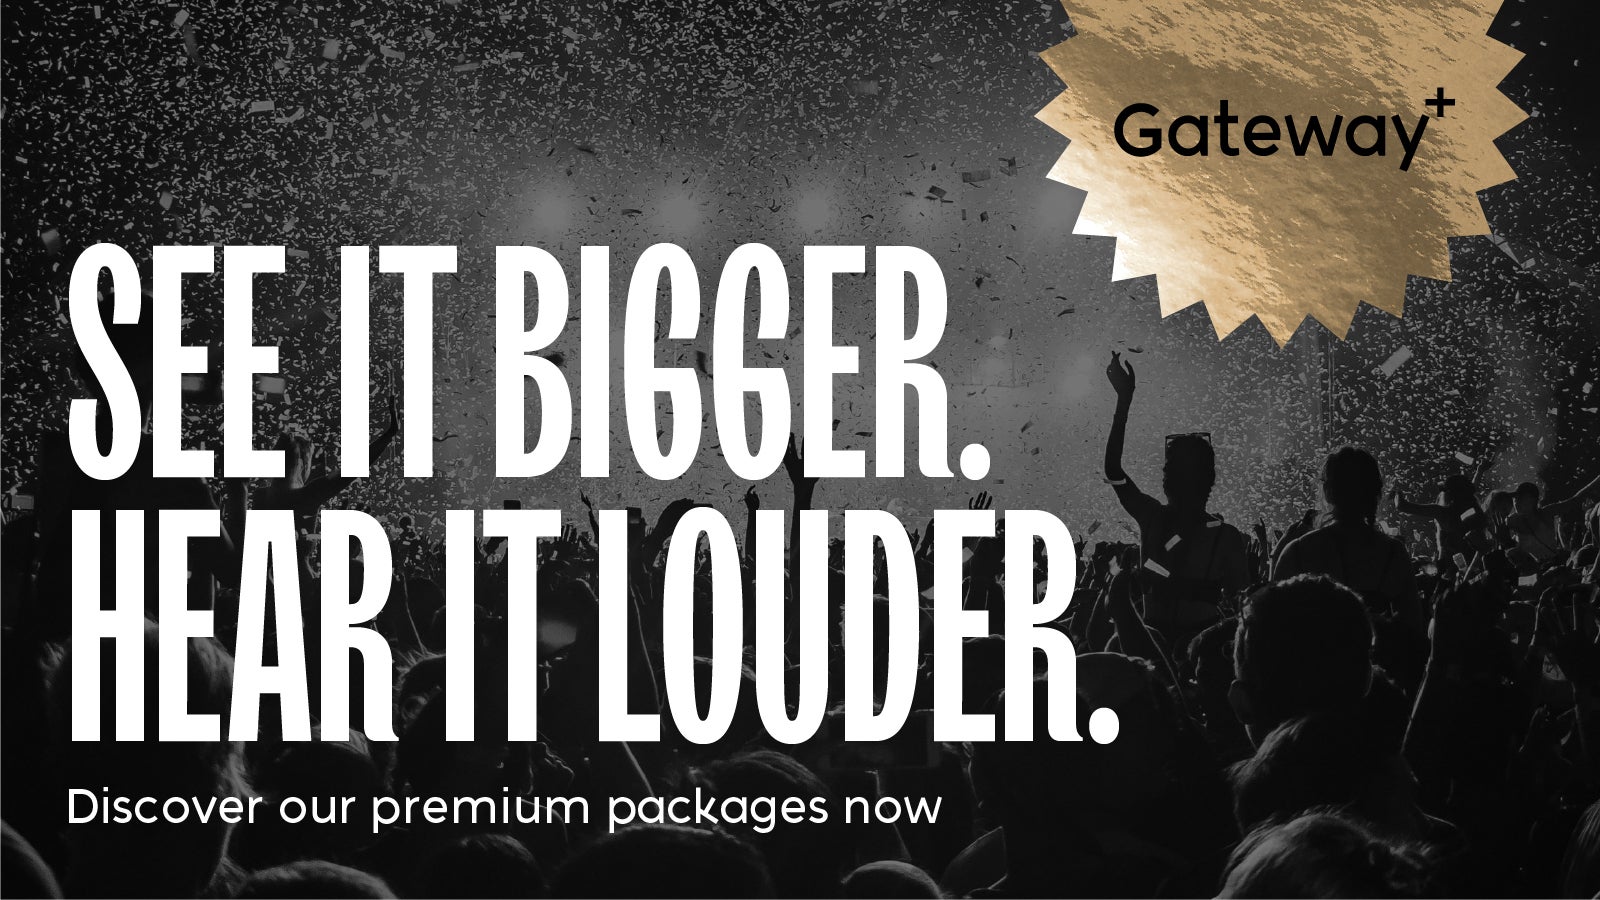 York Guildhall Orchestra - Premium Package - Gateway+ Event Title Pic